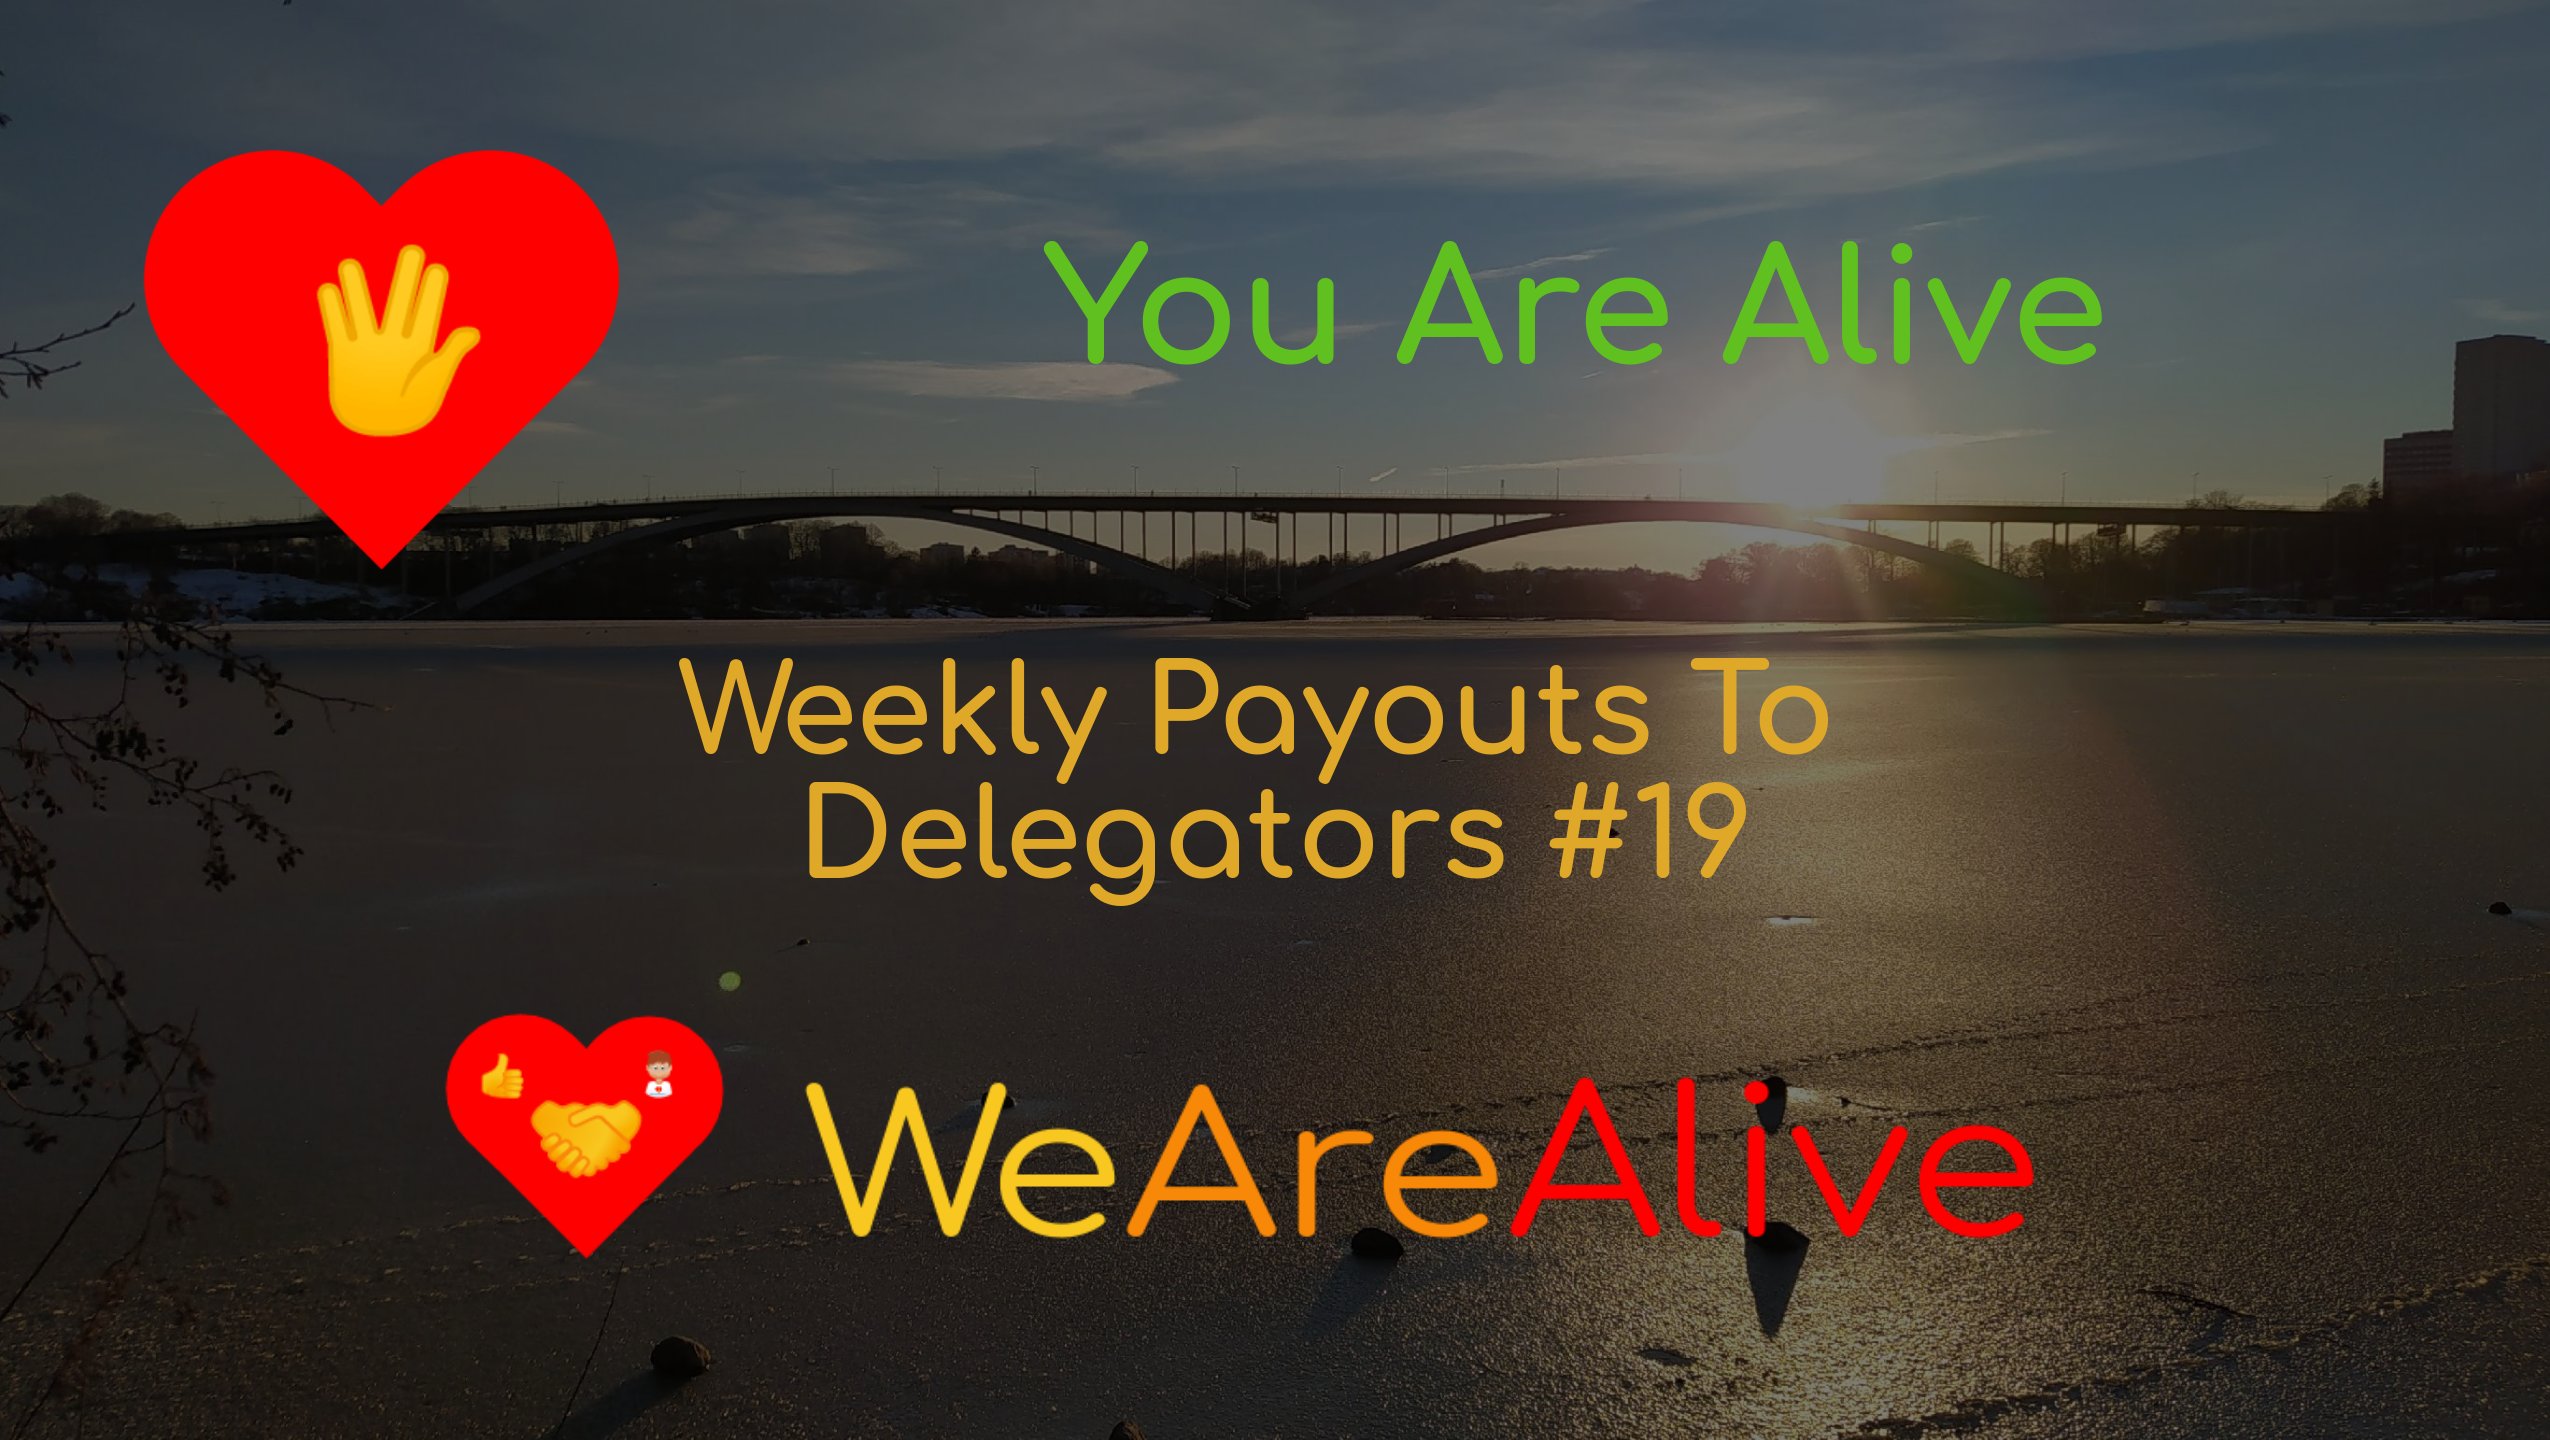 @youarealive/you-are-alive-weekly-payouts-to-delegators-19